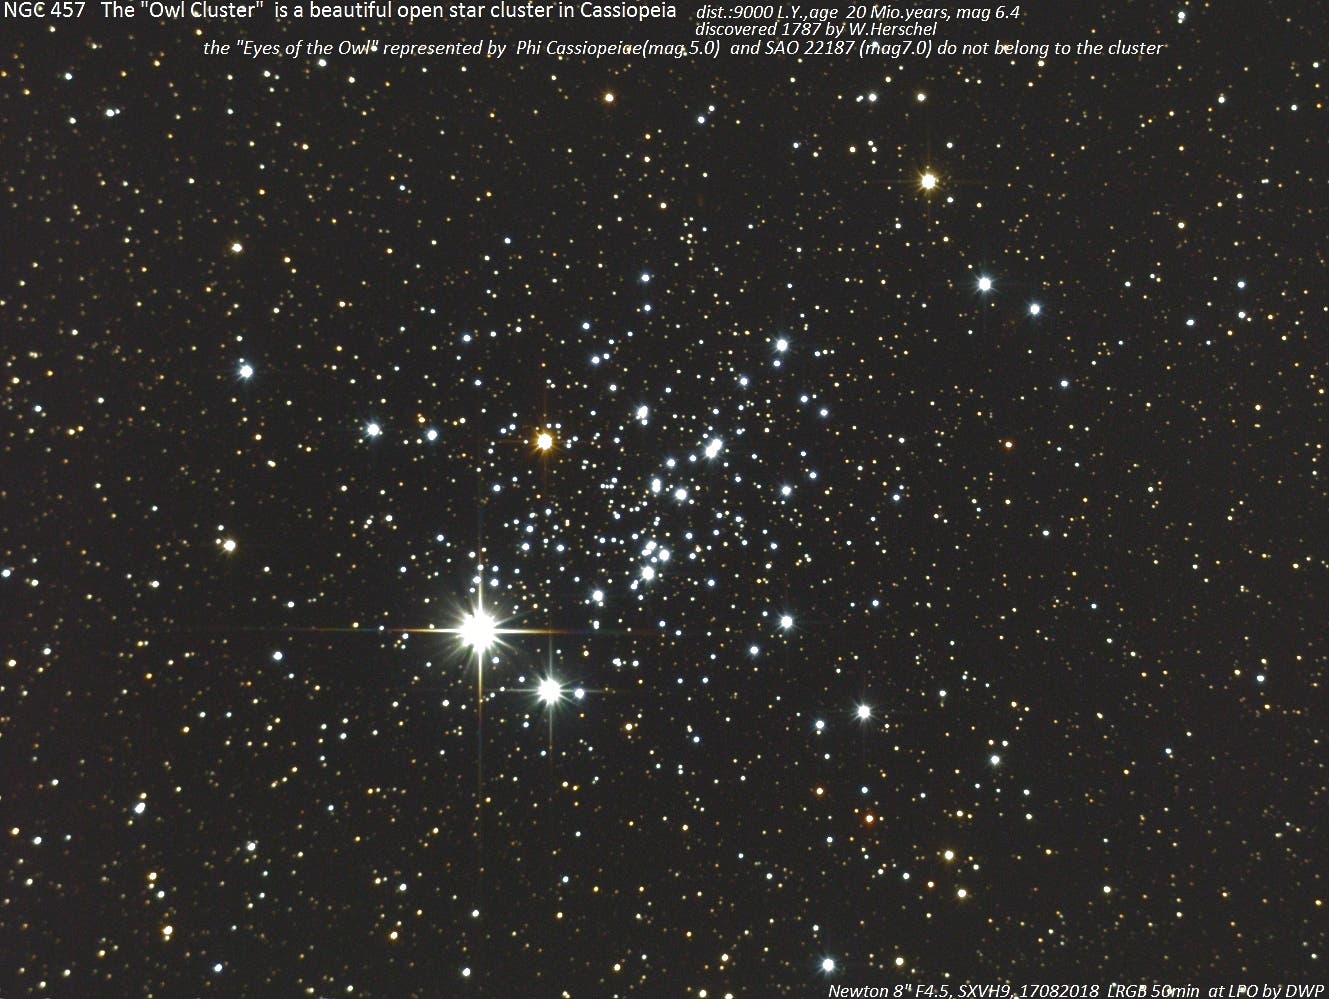 NGC457 – Offener Sternhaufen in Cassiopeia ("Owl Cluster")